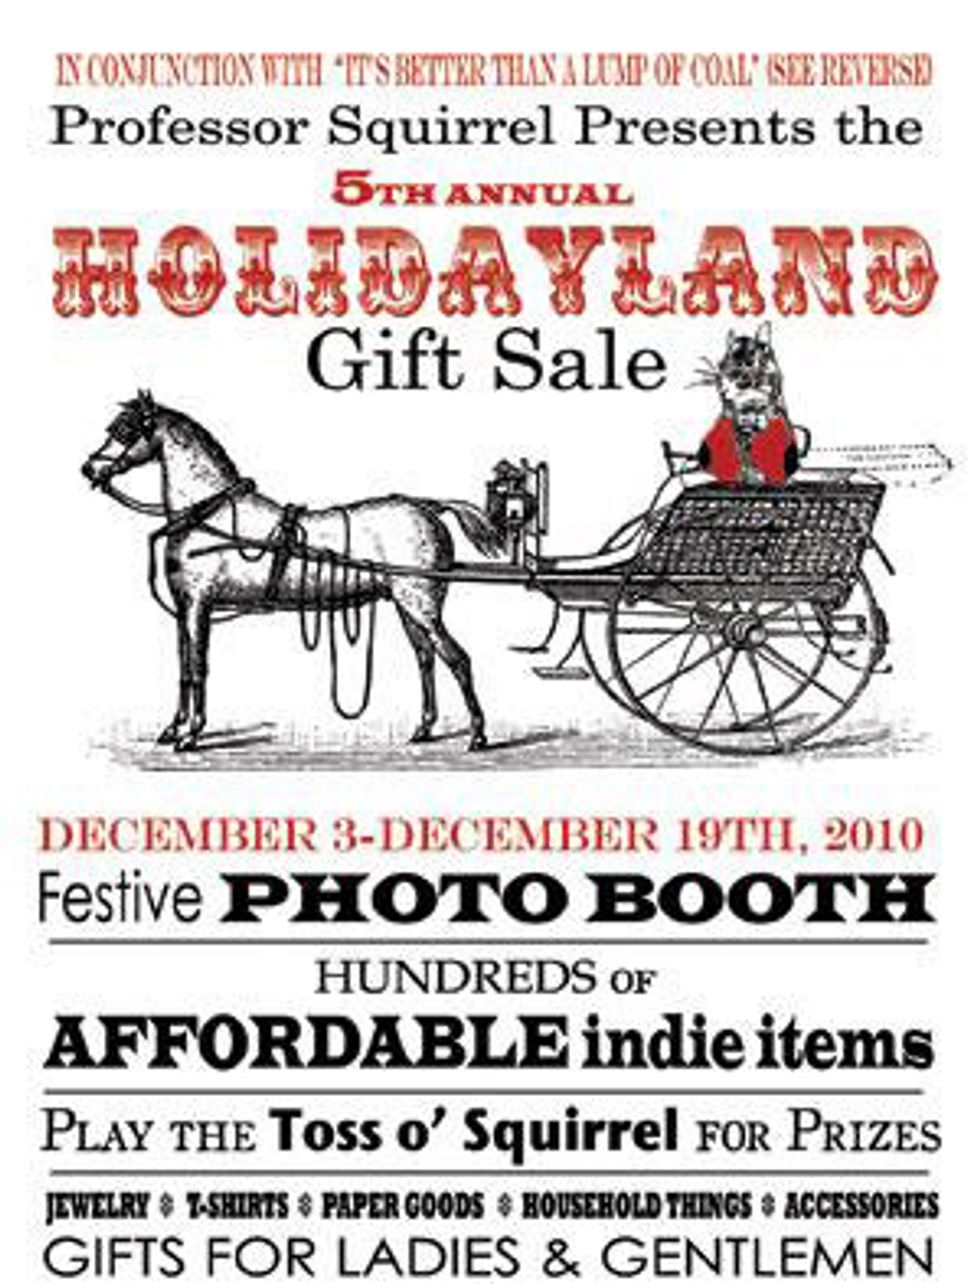 Compound Gallery's Holidayland Art & Gift Sale Going On Now